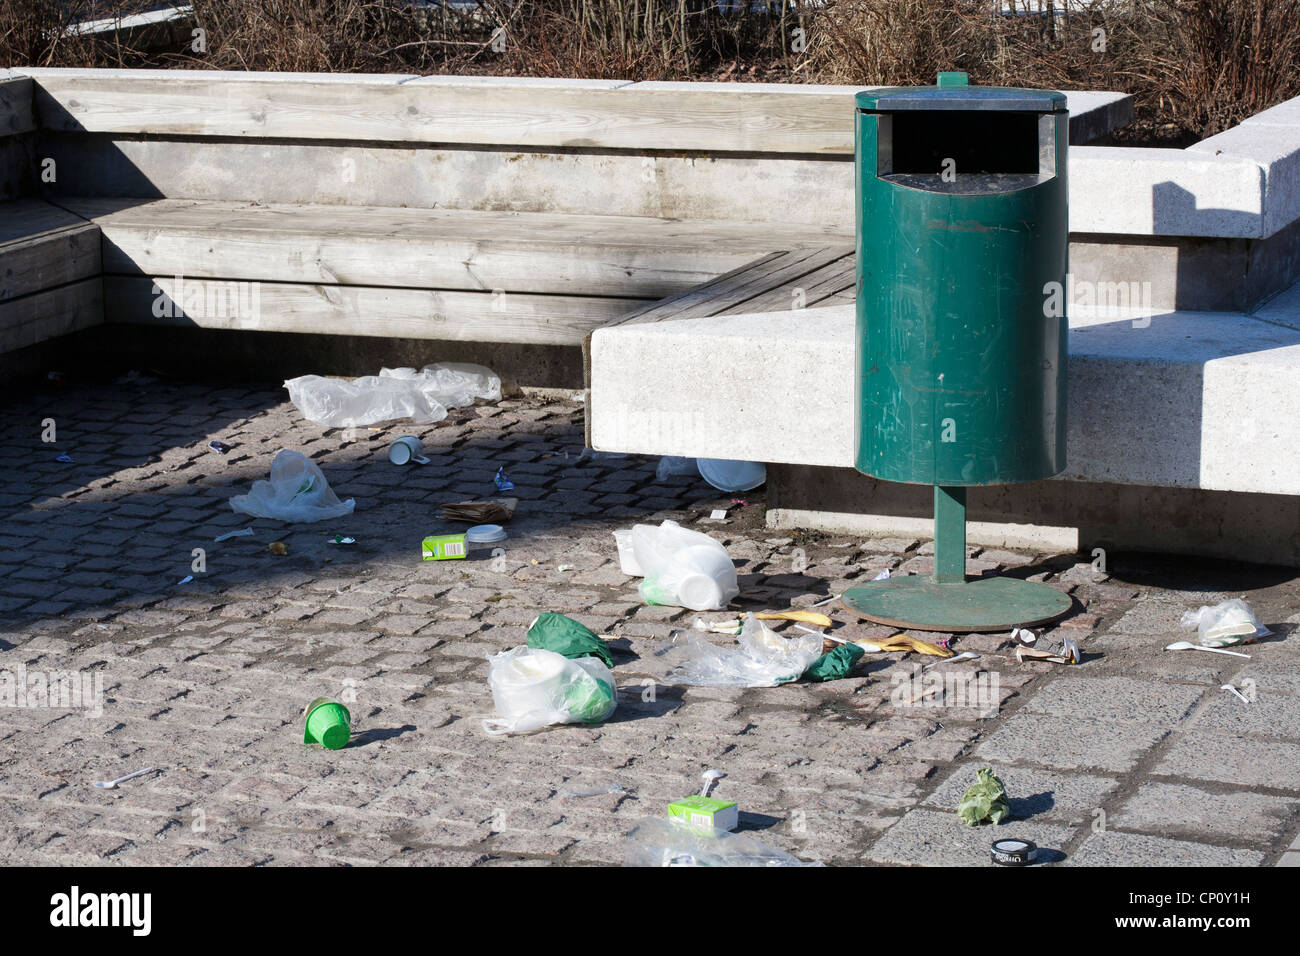 littered area with empty trashcan Stock Photo